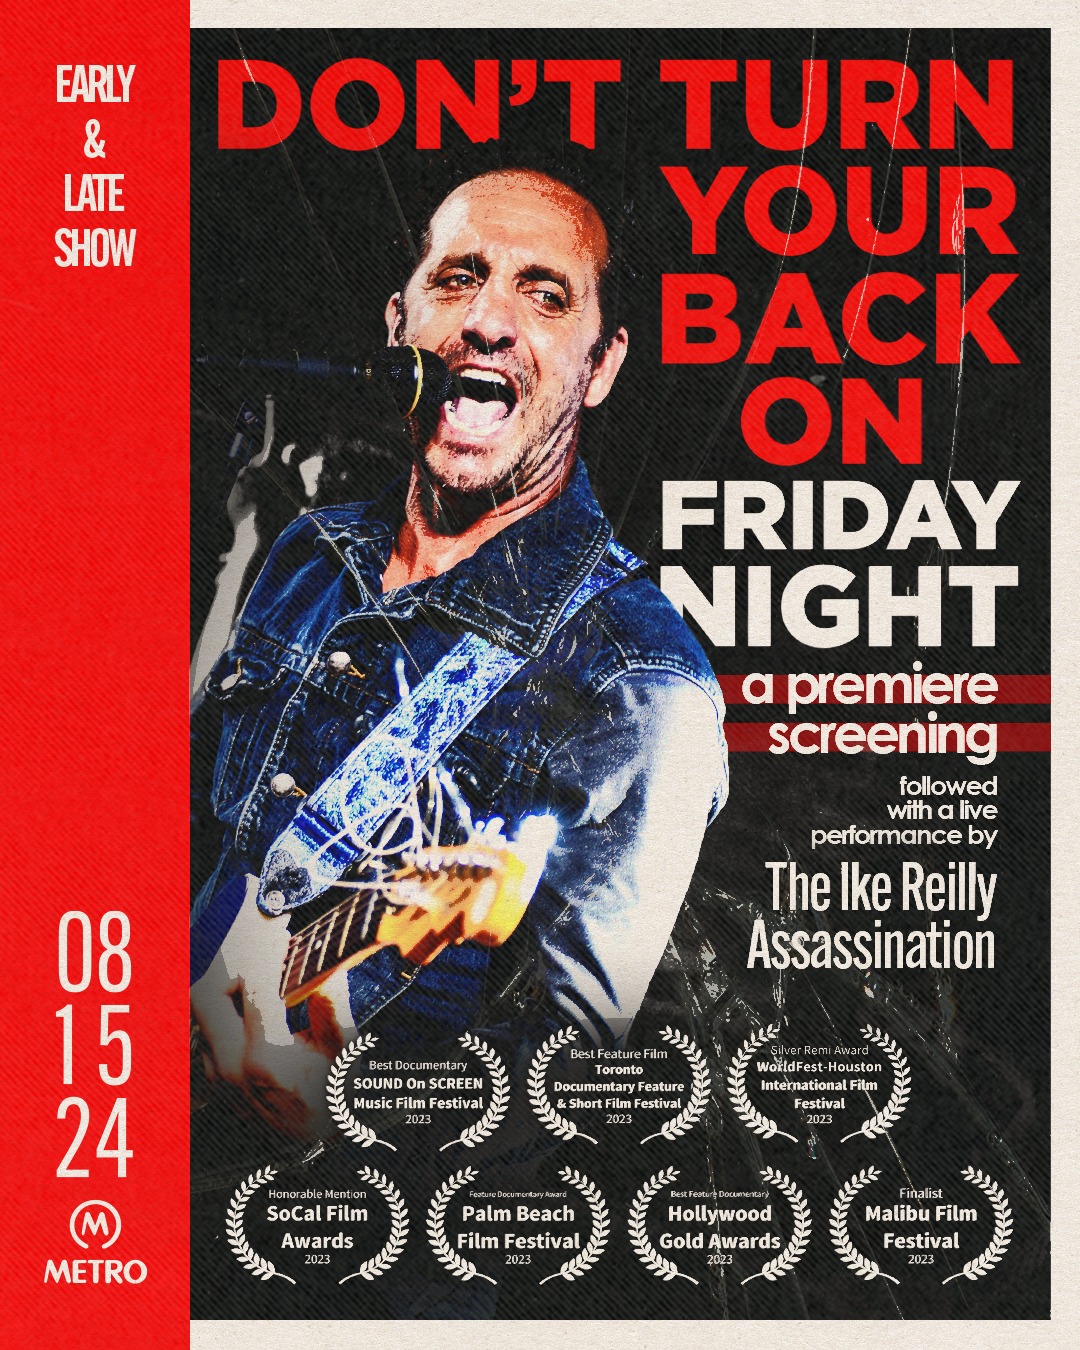 Don’t Turn Your Back on Friday Night: A Premiere Screening